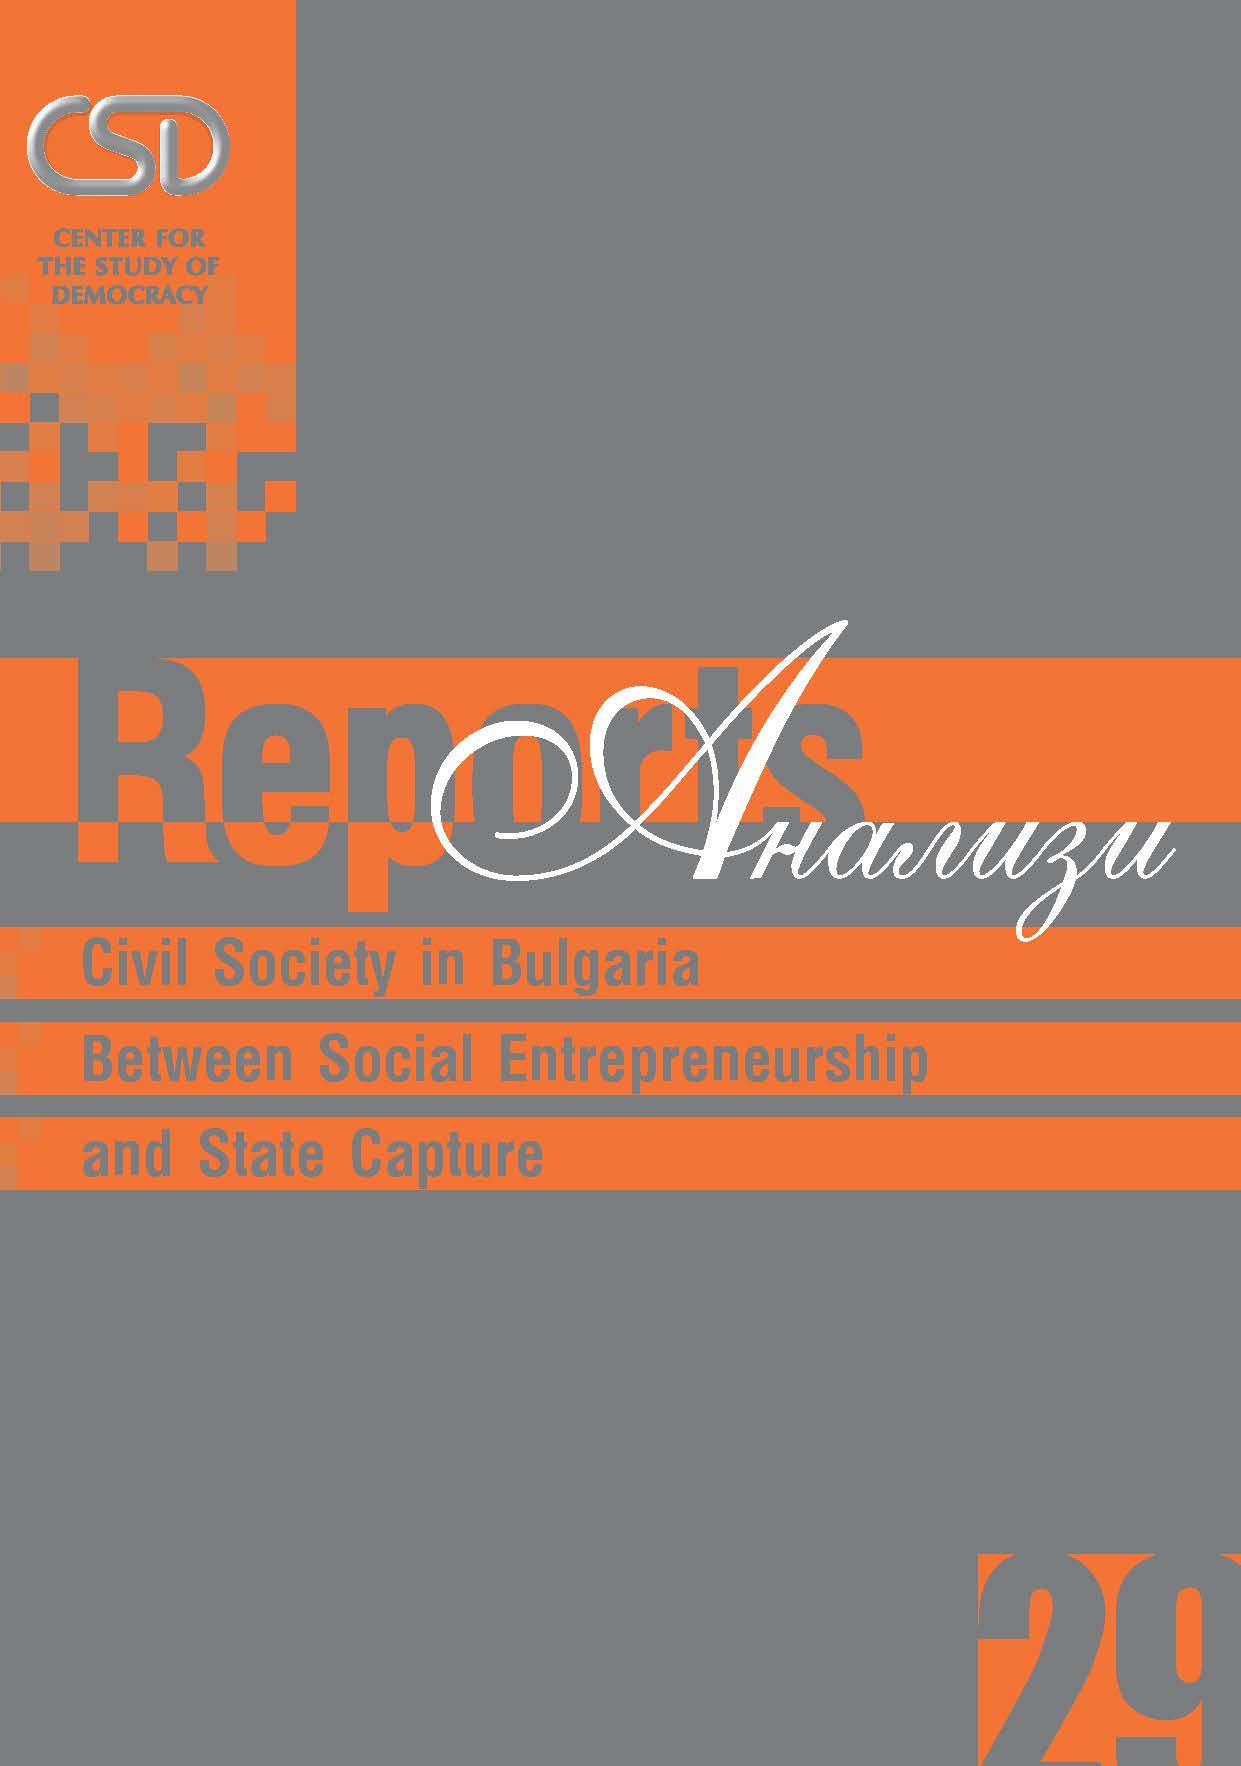 CSD-Report  29 - Civil Society in Bulgaria: Between Social Entrepreneurship and State Capture Cover Image